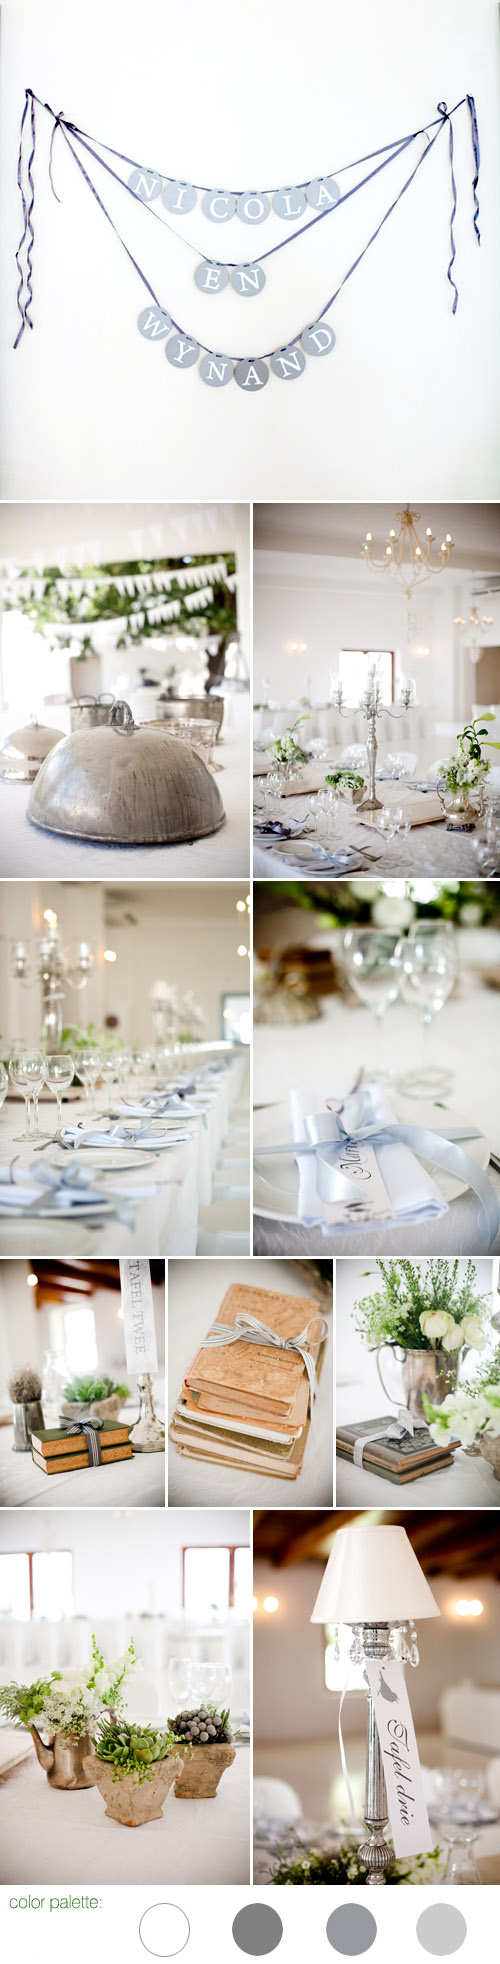 romantic vintage inspired real wedding in south africa, white, gray and silver wedding color palette and table decor, images by Christine Meintjes